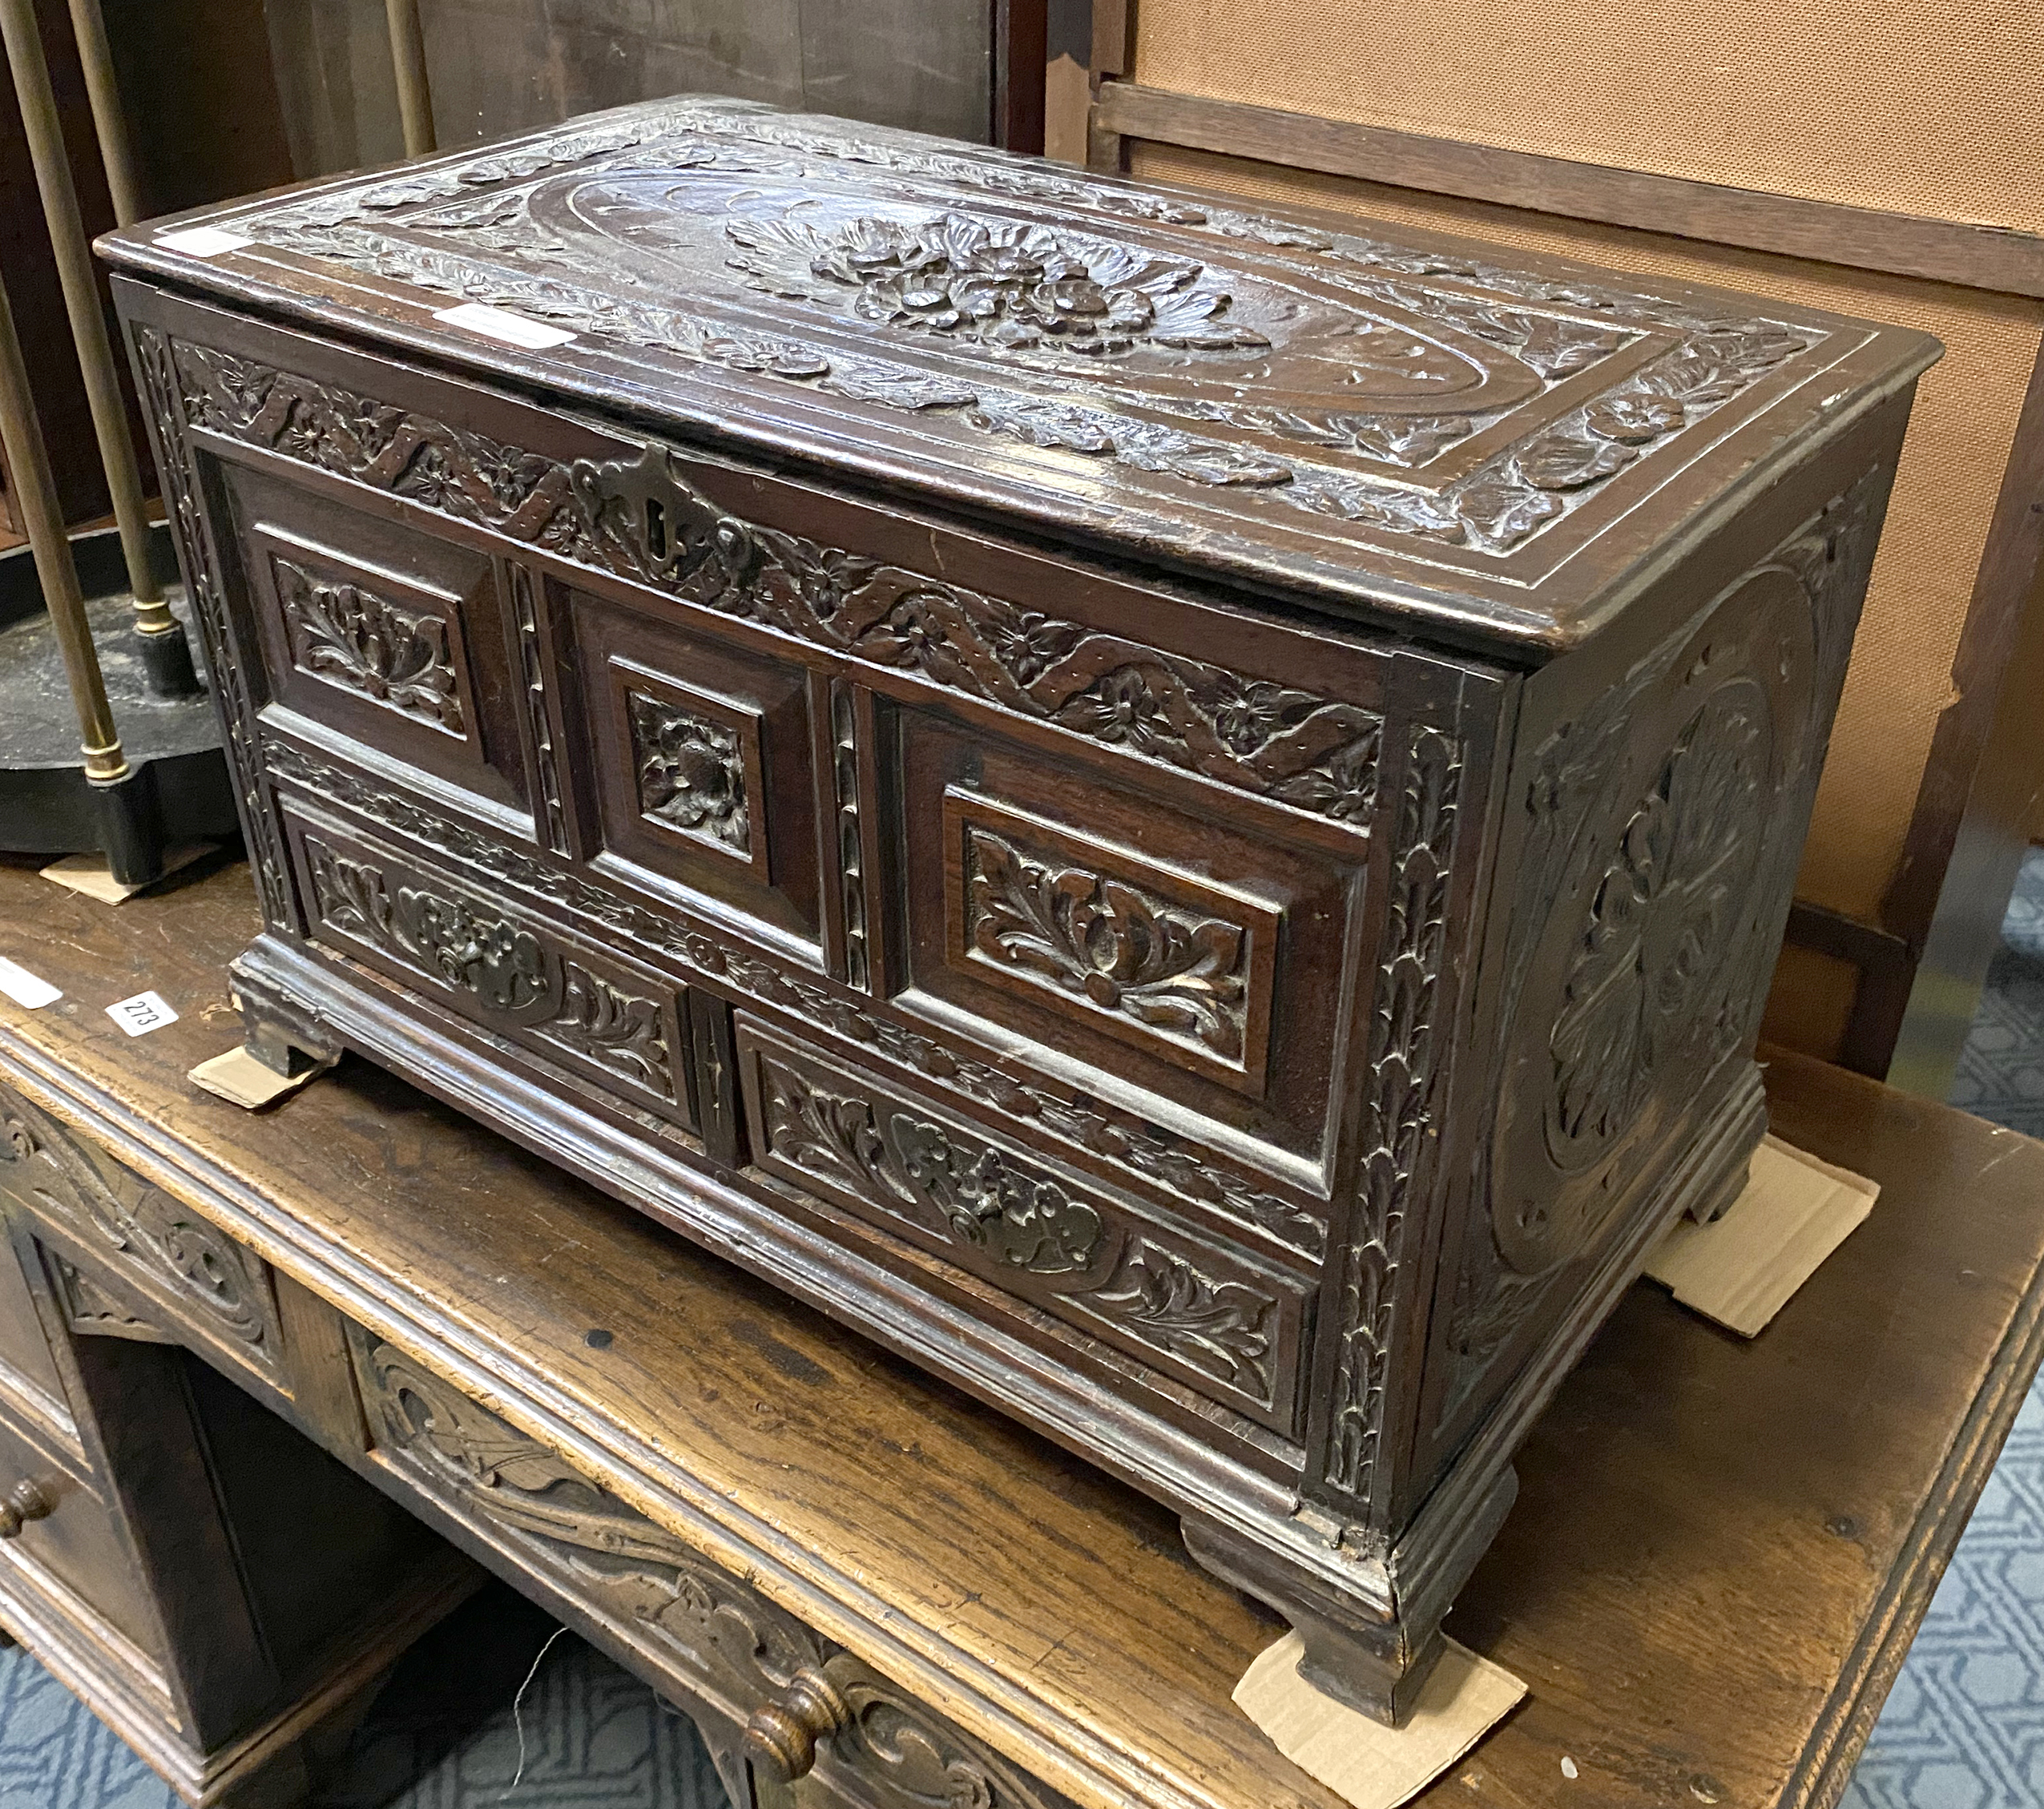 SMALL CARVED BOX WITH 2 DOORS